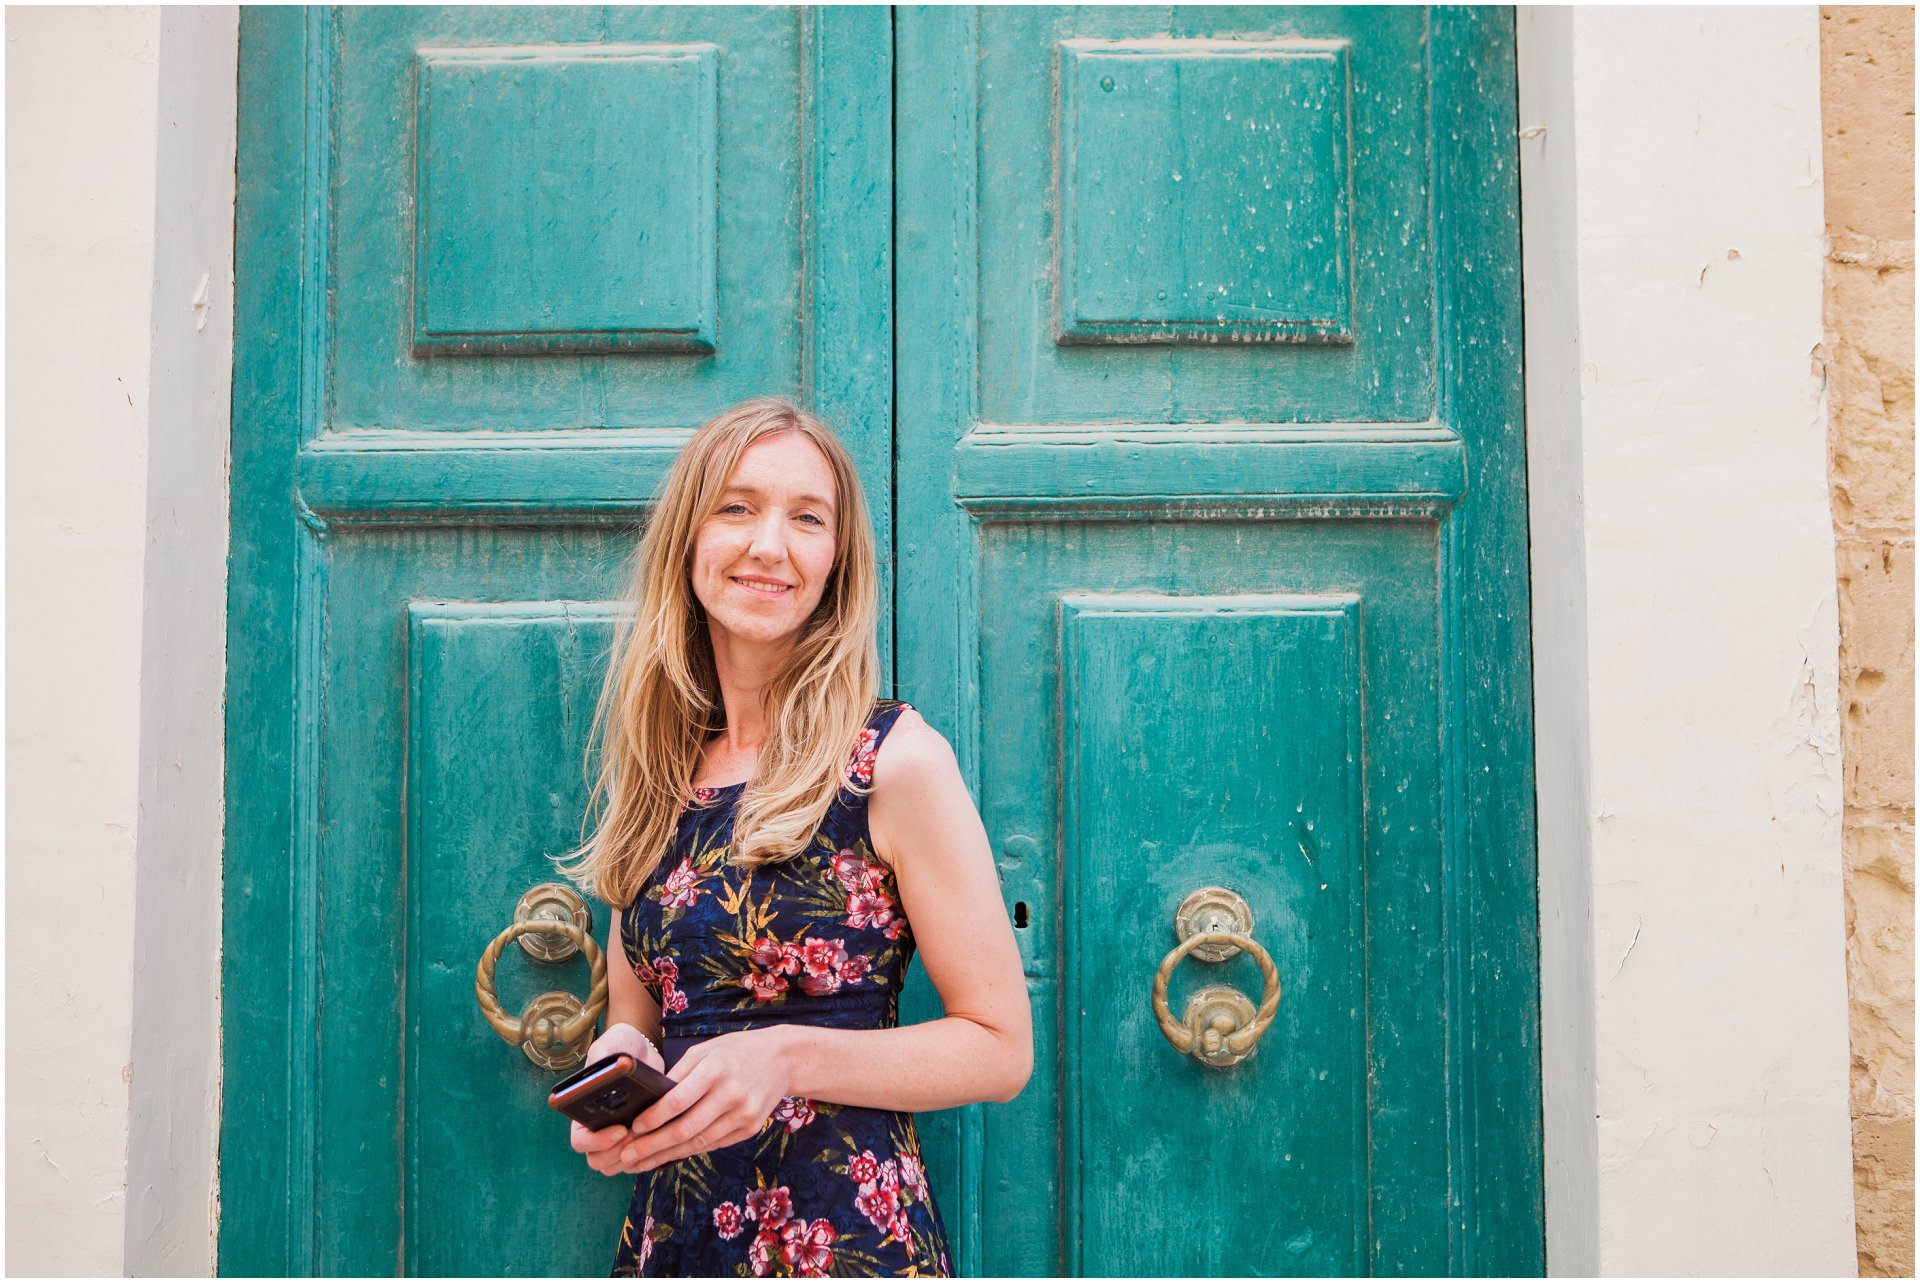 Mdina destination brand photography, Malta teal door, Laura from Tell My Story, image by London brand photographer and destination brand photographer AKP Branding Stories